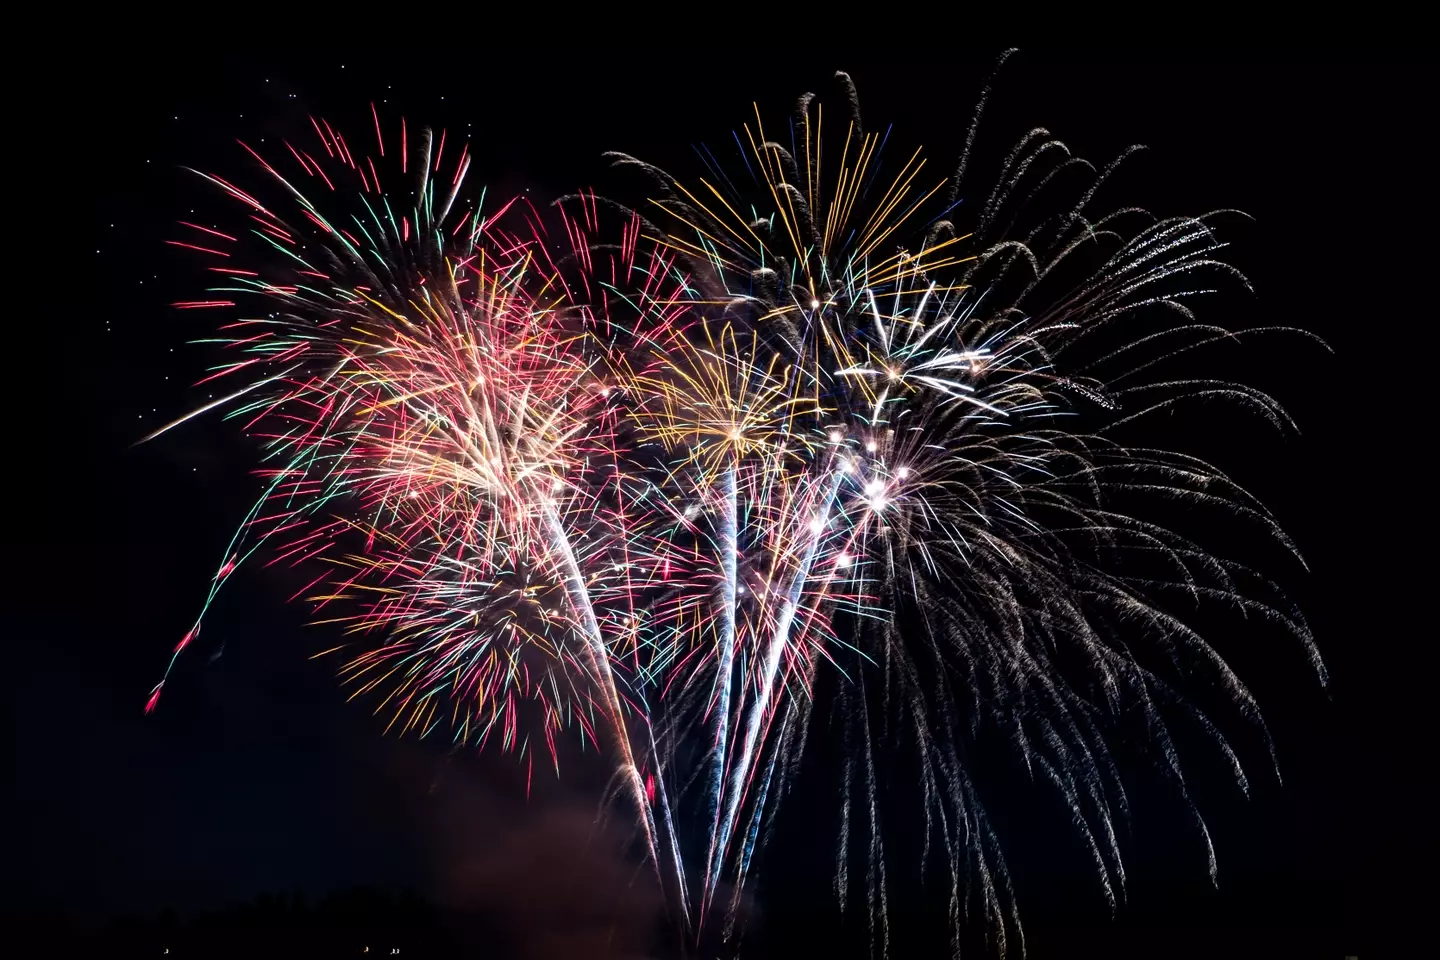 Animal charities are urging people to rethink having private firework displays (